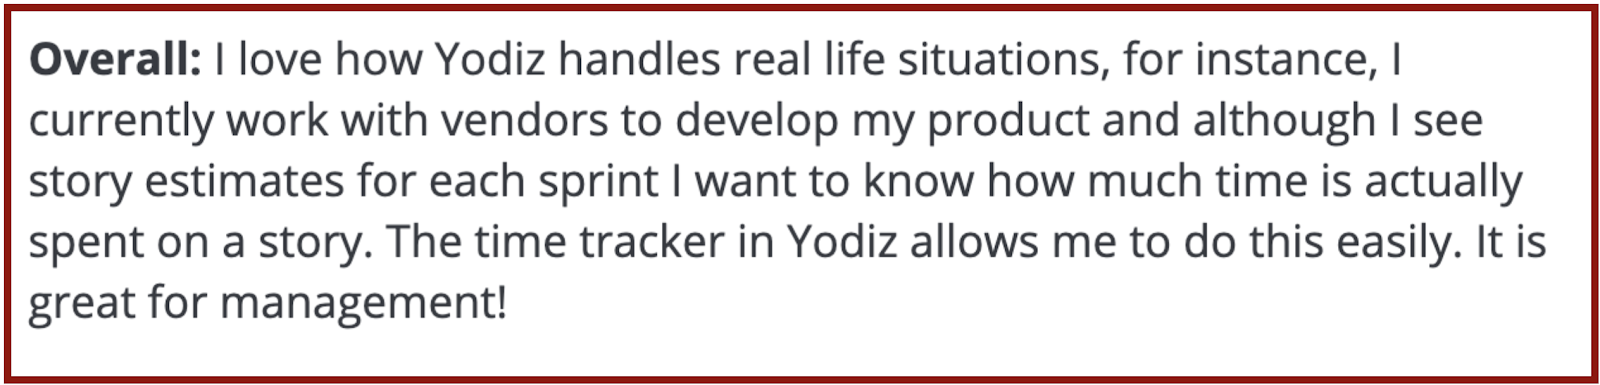 Yodiz reviews on Capterra: "Handles real life situations; time tracking is great for management" 